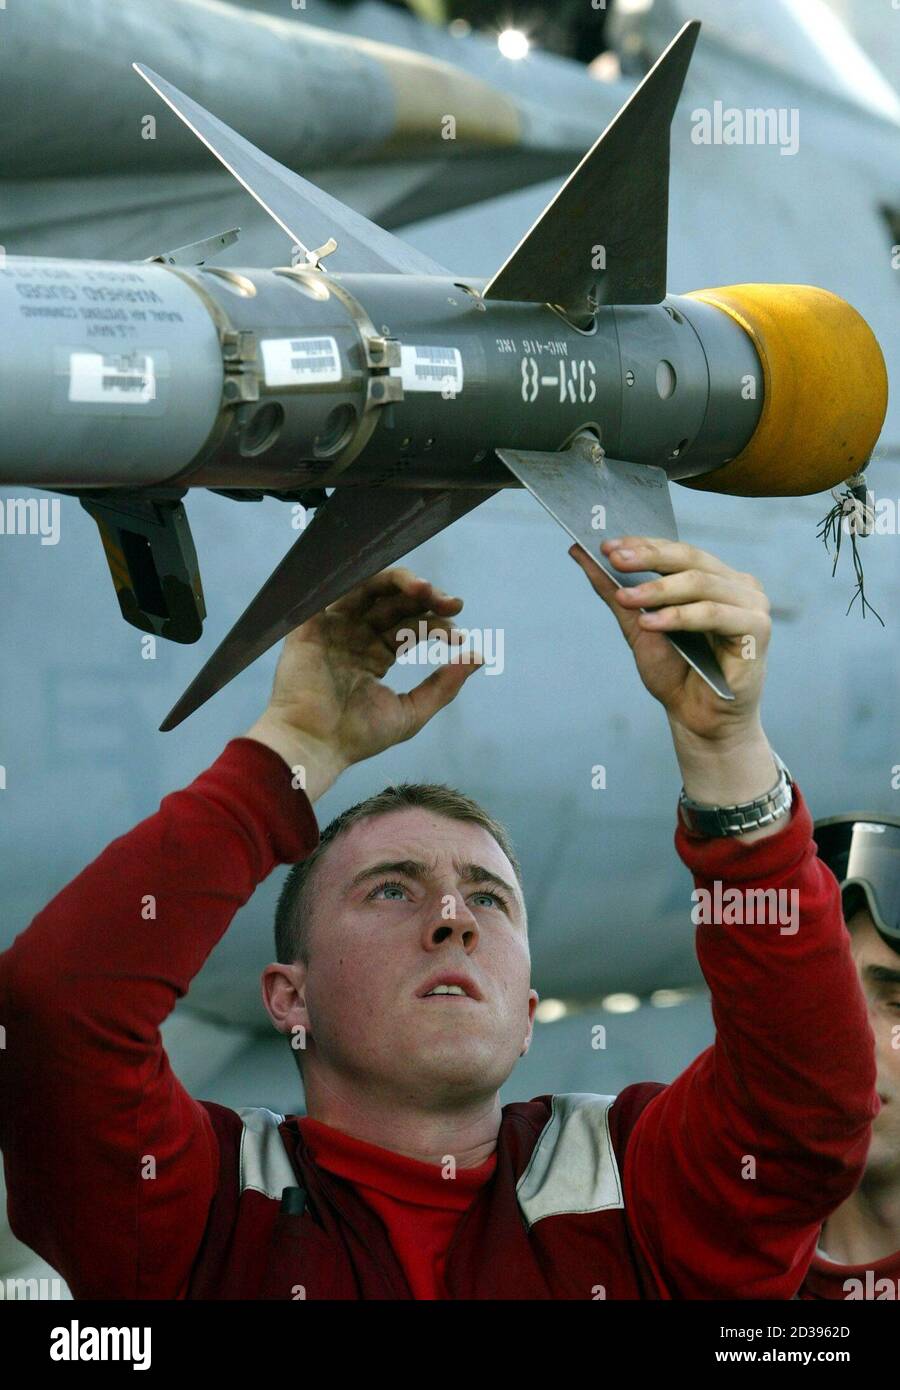 Airman Ordnance crew member Scott Inke, from Mississippi, inspects the fins on an AIM-9 Sidewinder missile on a F/14D Tomcat on board the USS Abraham Lincoln aircraft carrier in the Gulf, February 23, 2003. The USS Abraham Lincoln is part of an eight-ship battle group operating in the Gulf in support of Operation Southern Watch, as U.S. Secretary of State Colin Powell, on a visit to Japan, dropped heavy hints about Washington's timetable for war in Iraq, saying the U.N. ought to decide what to do soon after a weapons inspectors' report expected on March 7. REUTERS/John Schults  JES/JV Stock Photo